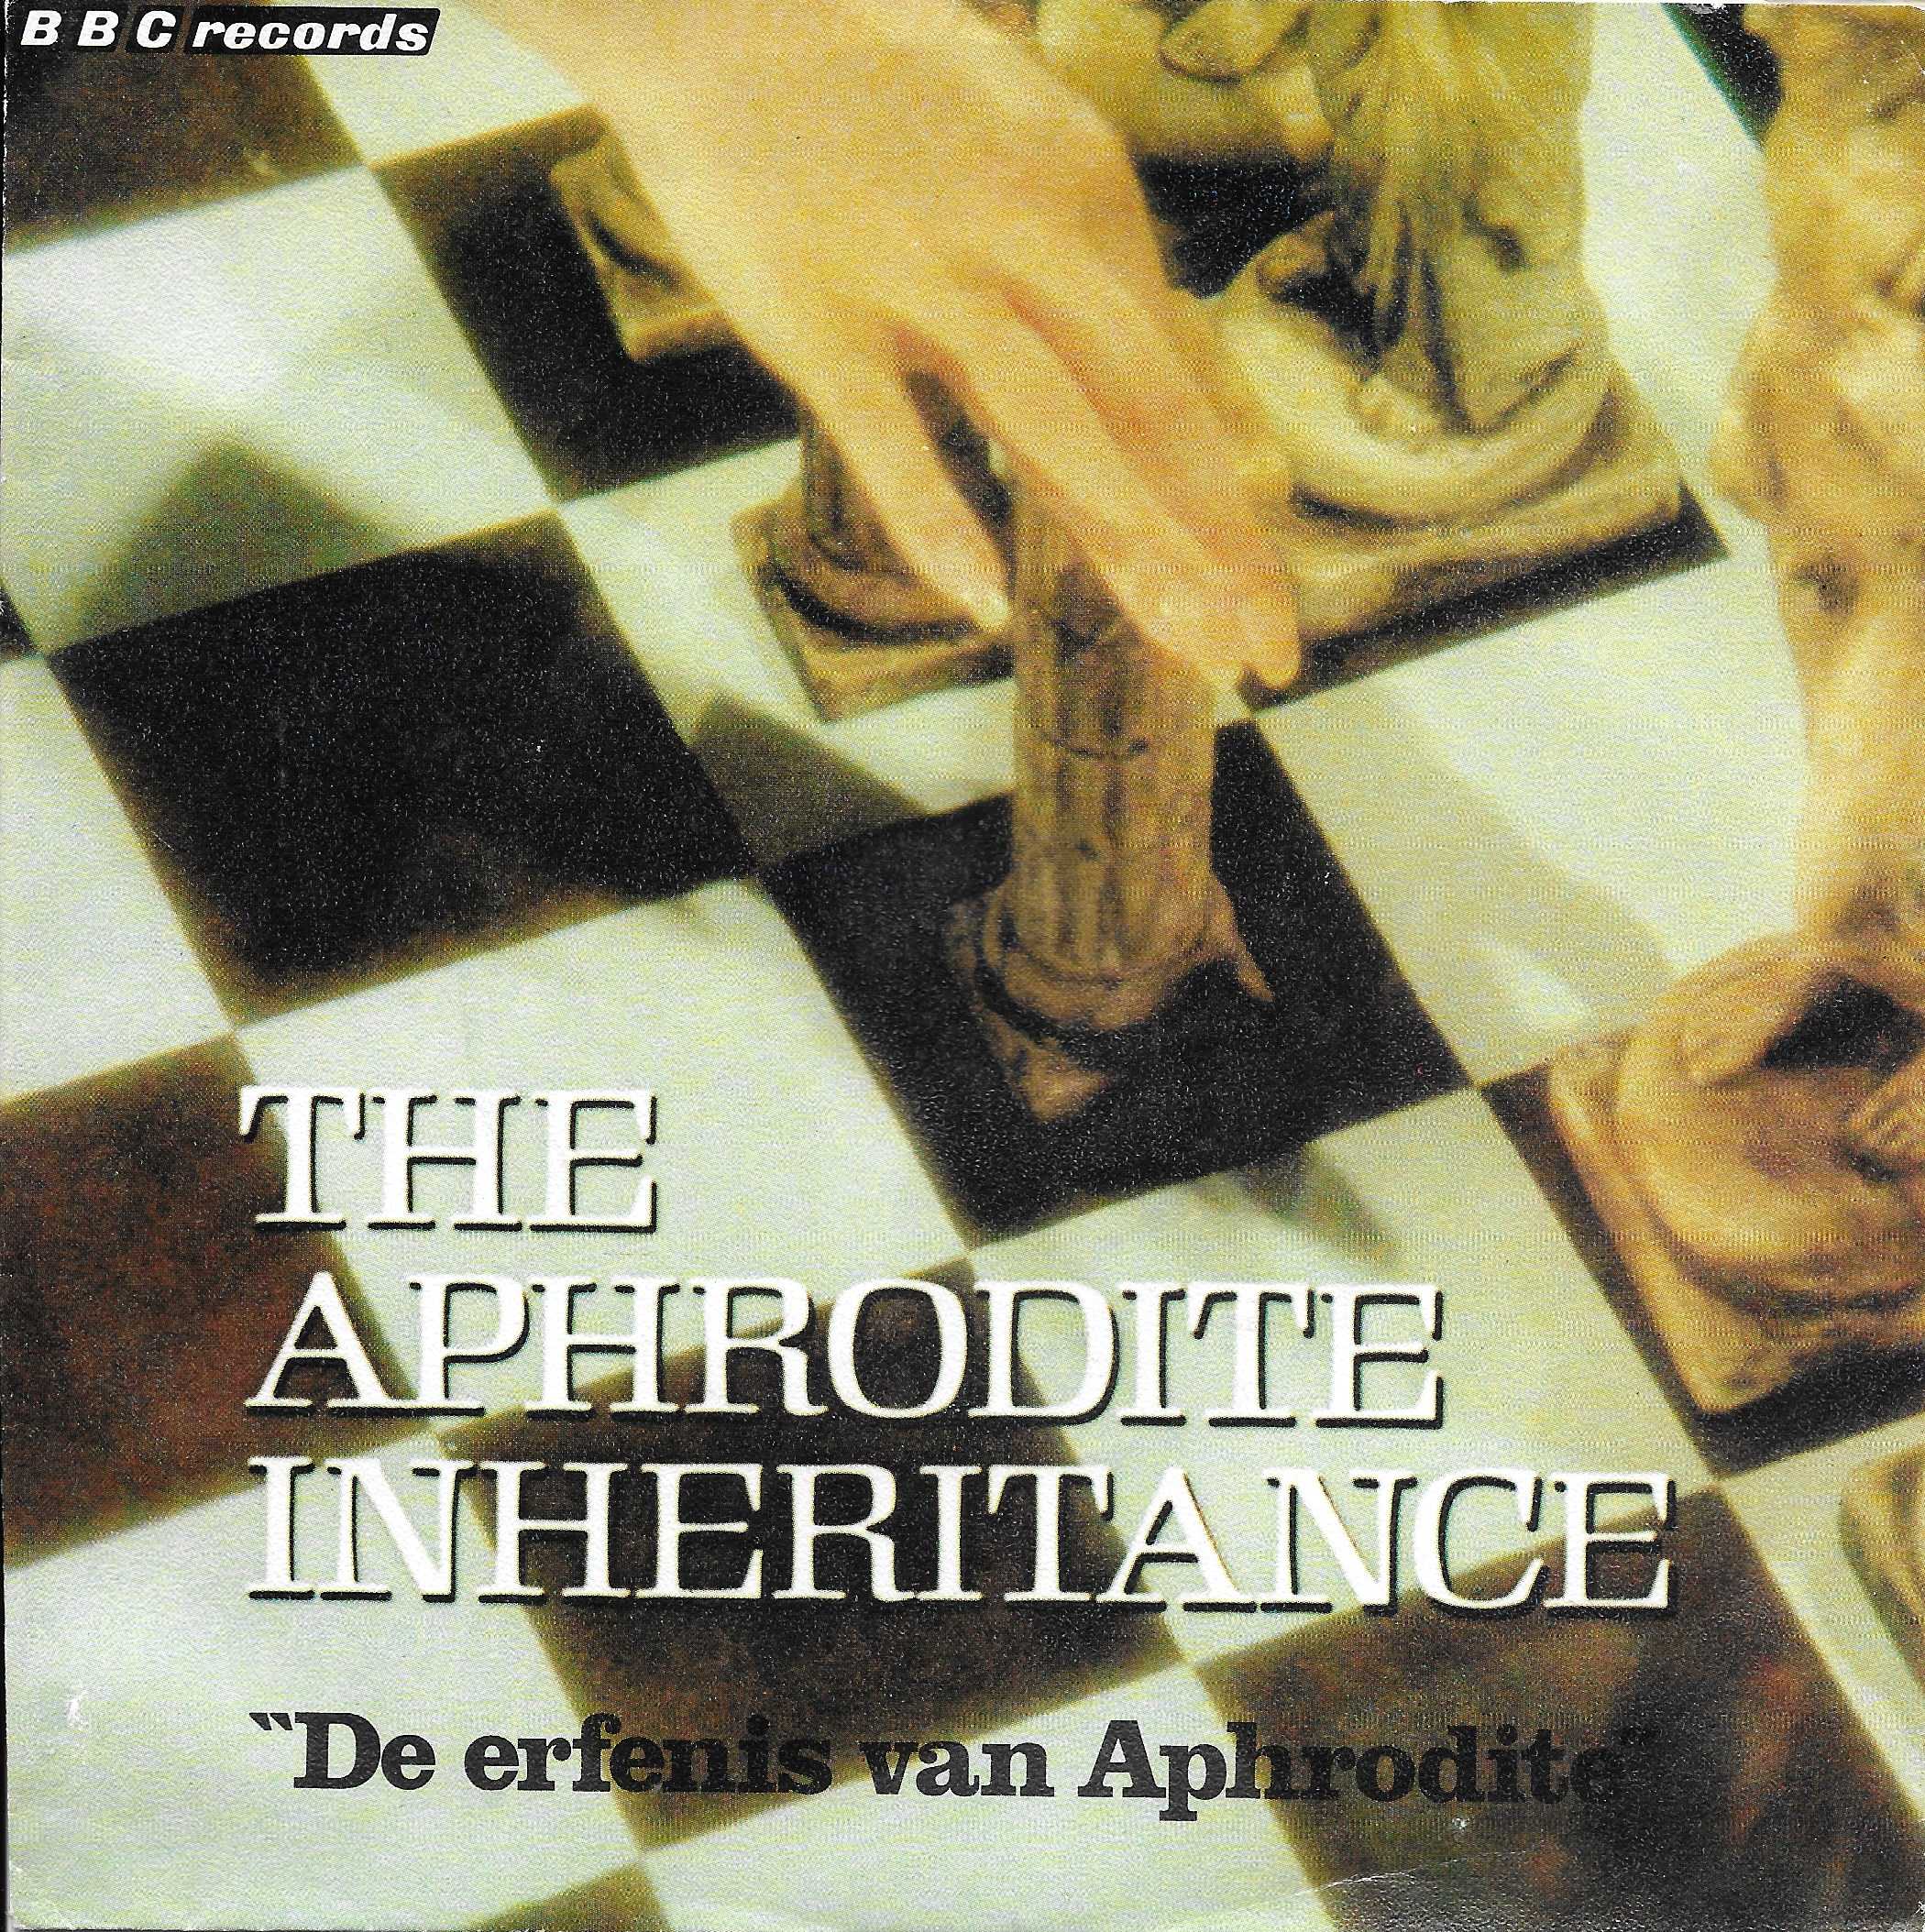 Picture of RESL 62-iD The Aphrodite inheritance by artist George Kotsonis from the BBC records and Tapes library